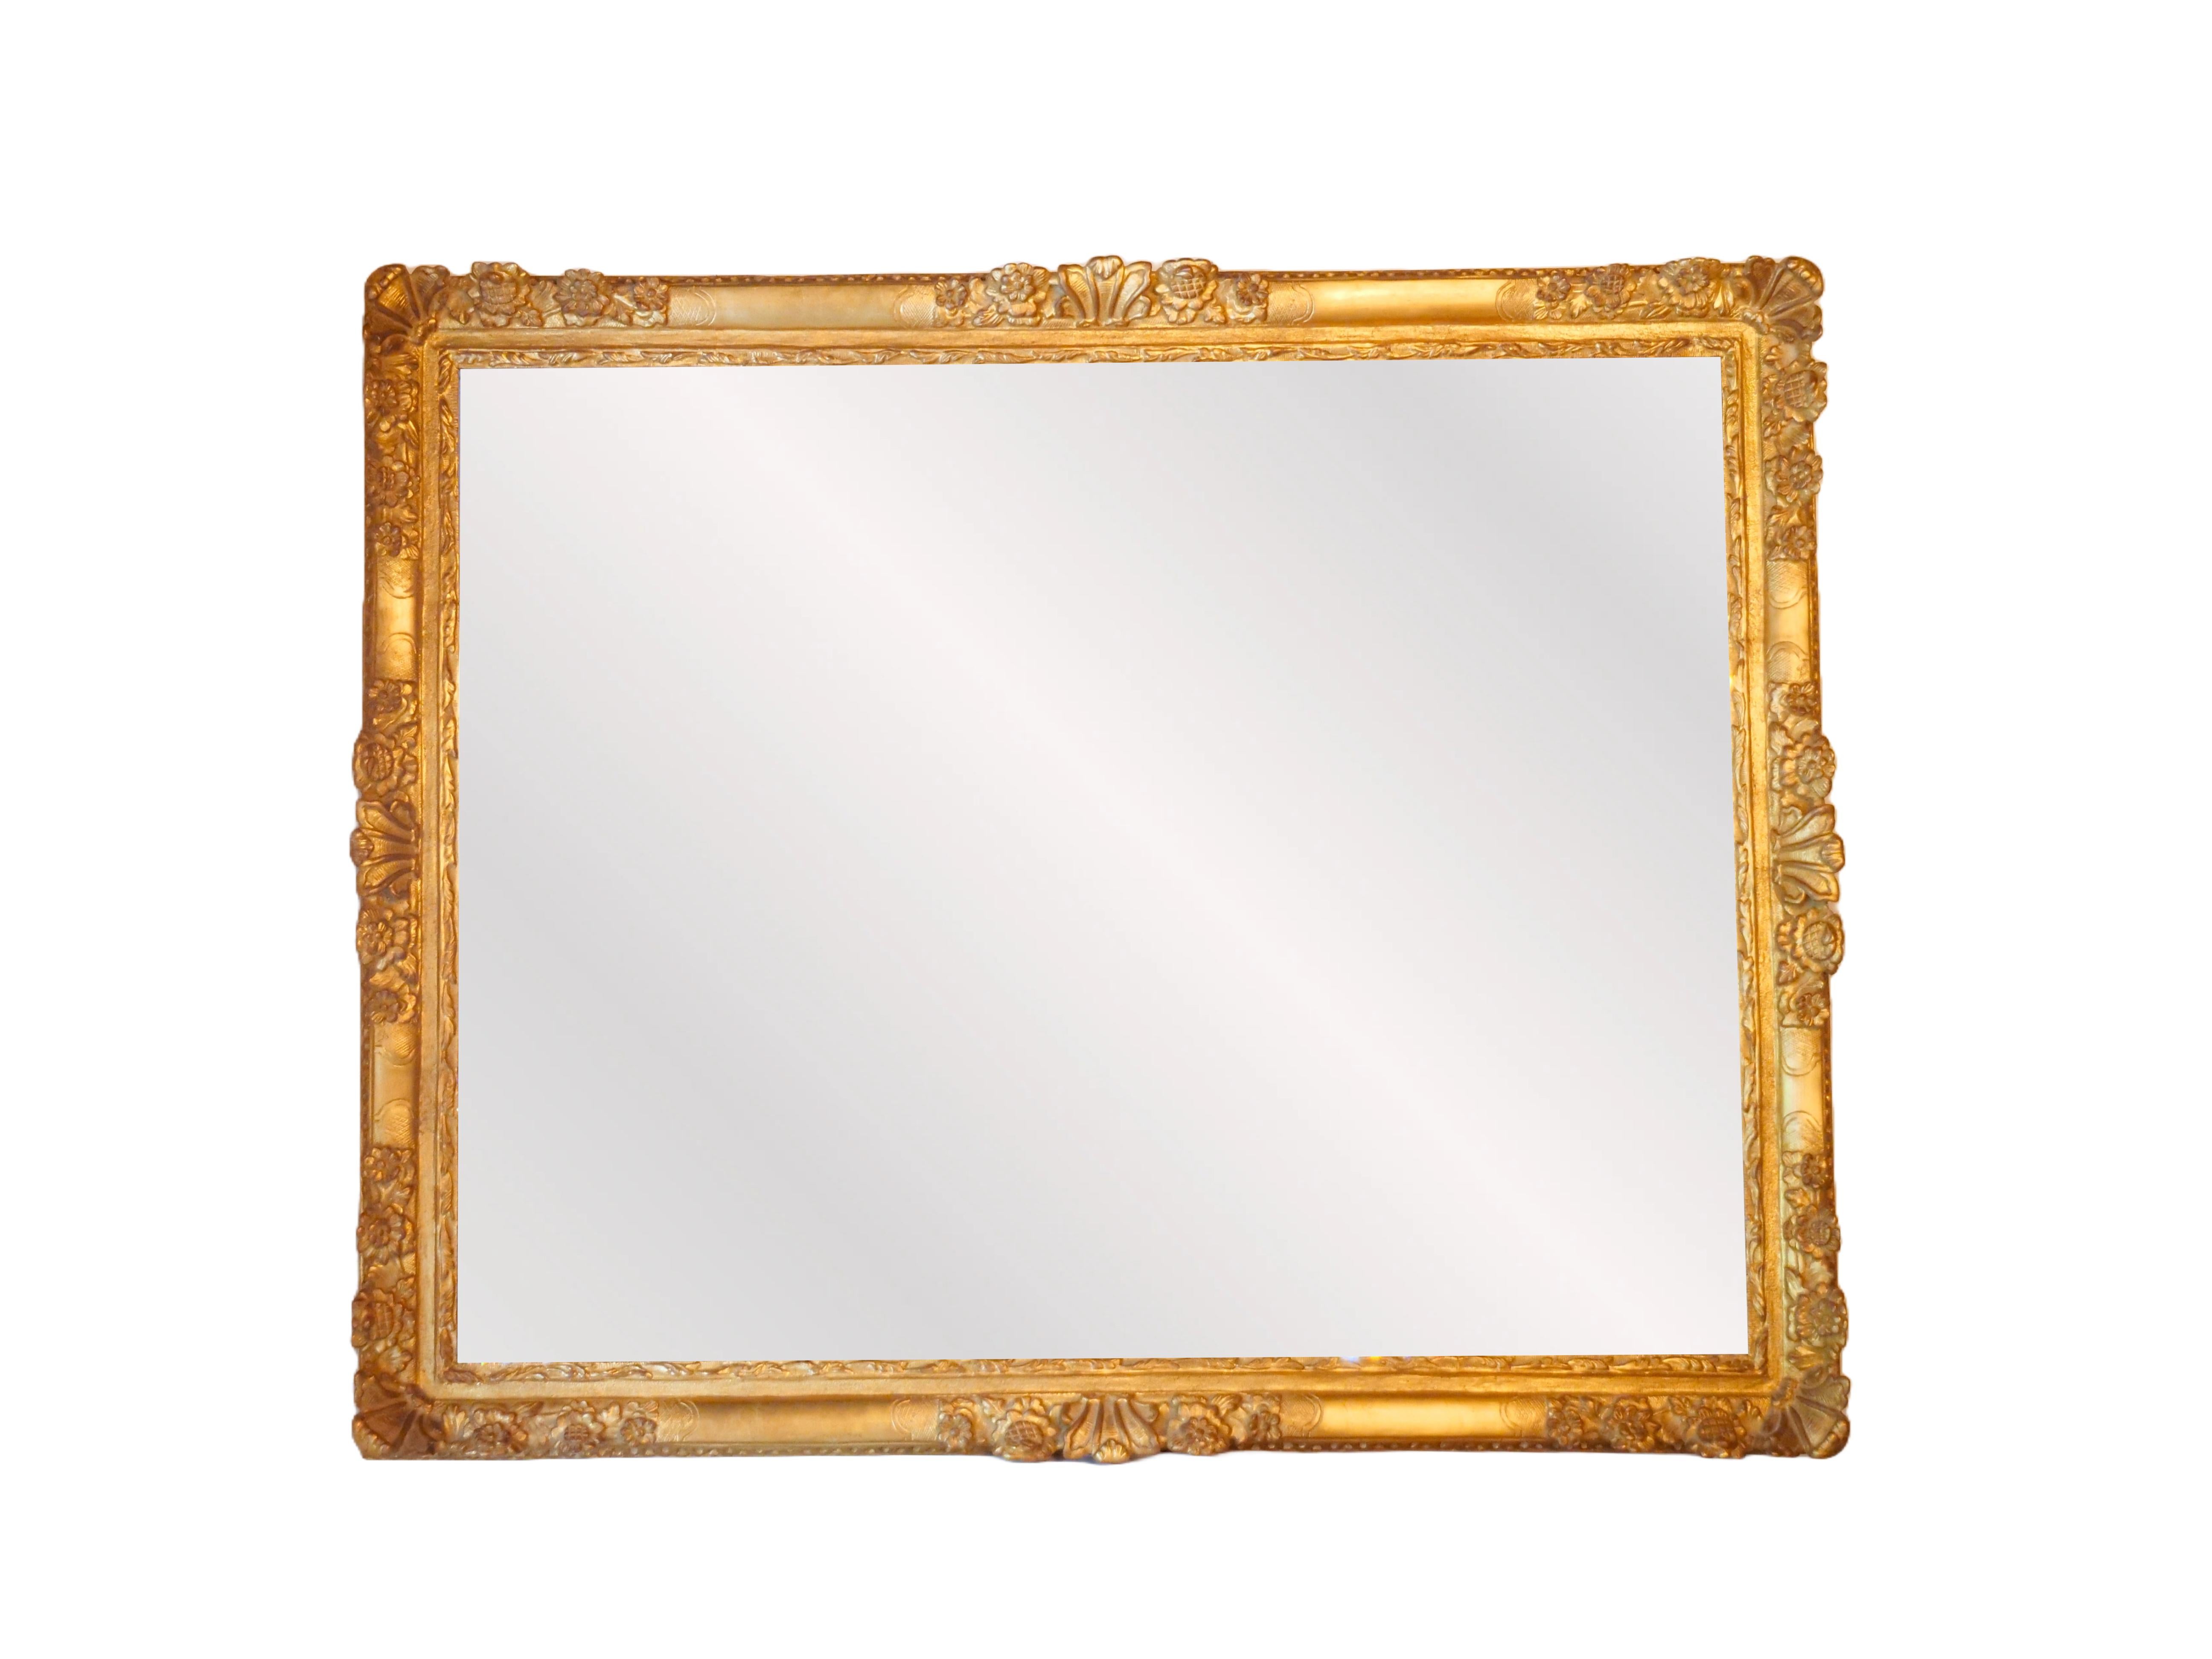 Exceptional French Giltwood Frame Rectangular Shape Hanging Wall Mirror For Sale 5